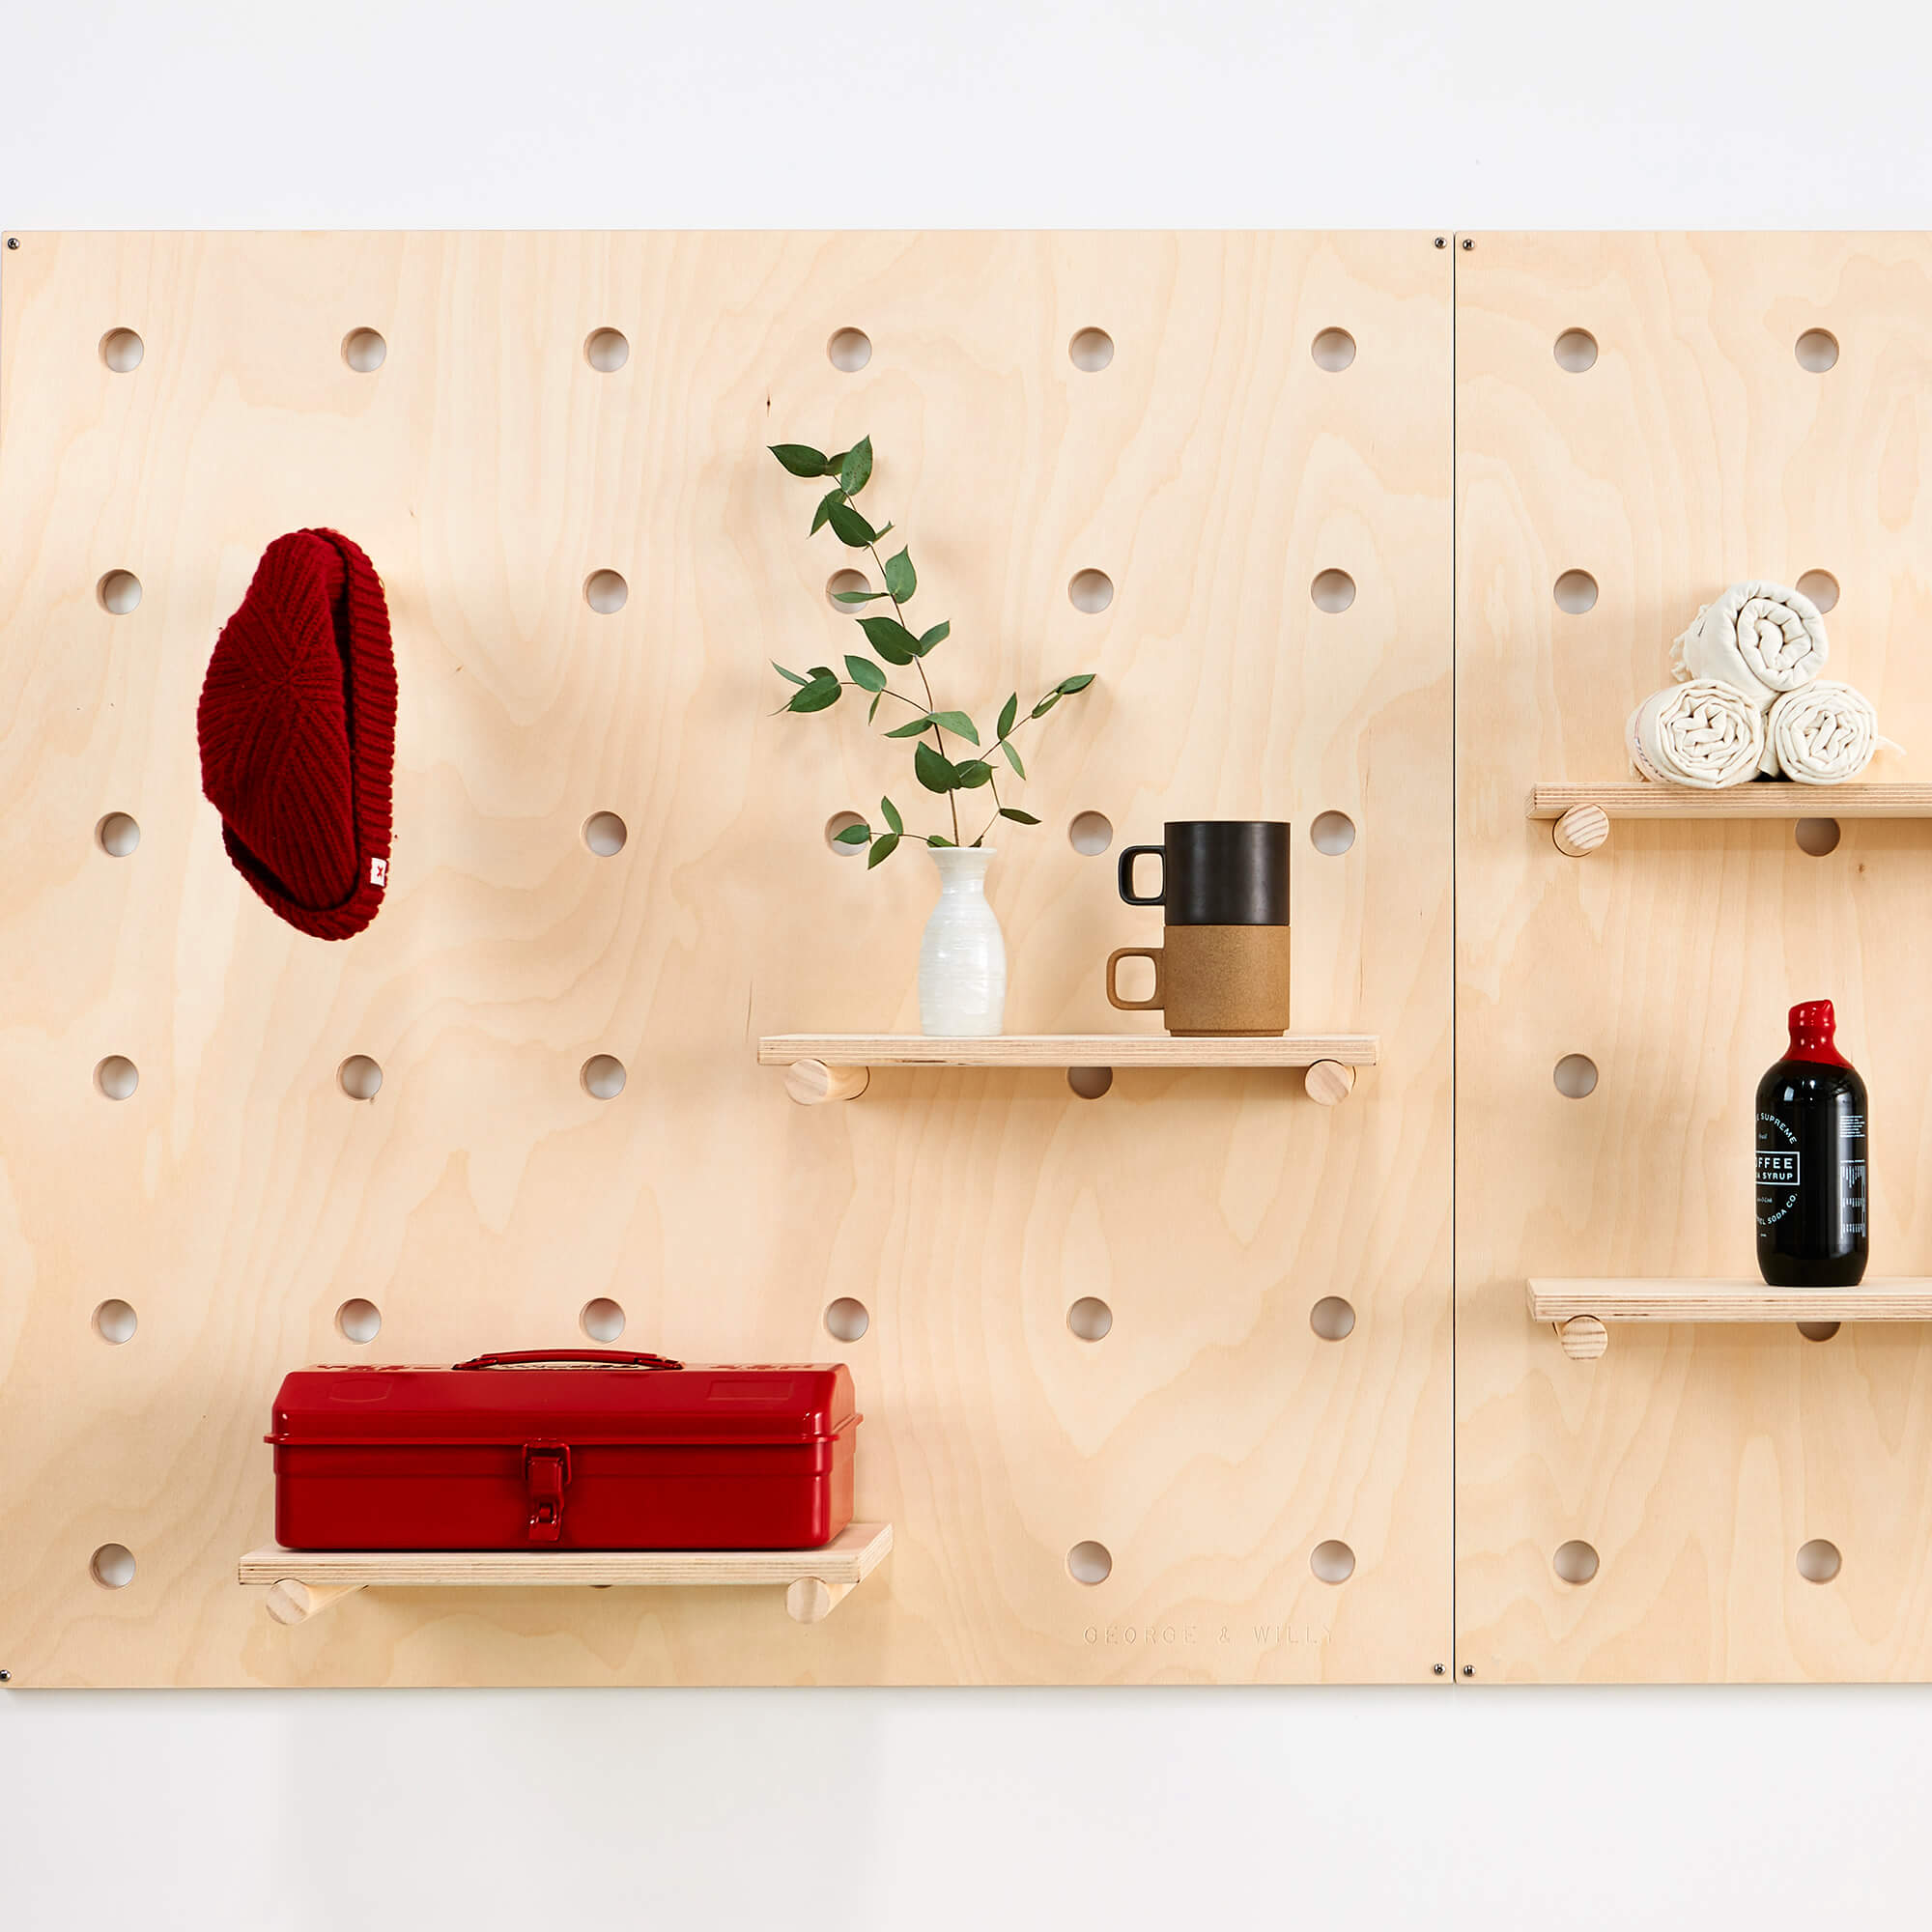 Wooden Pegboard - George & Willy EU